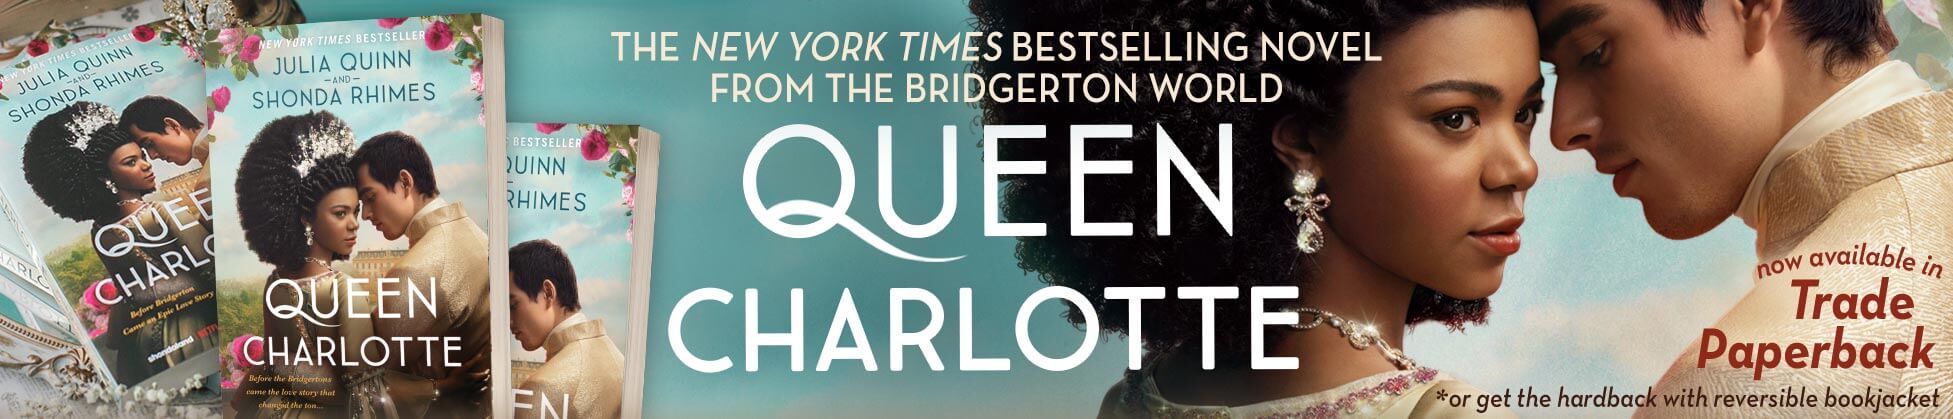 Promotial banner for Queen Charlotte, the New Yoke Times Bestselling novel from the Bridgerton world by Julia Quinn and Shonda rhimes. Now available in Trade paperback!